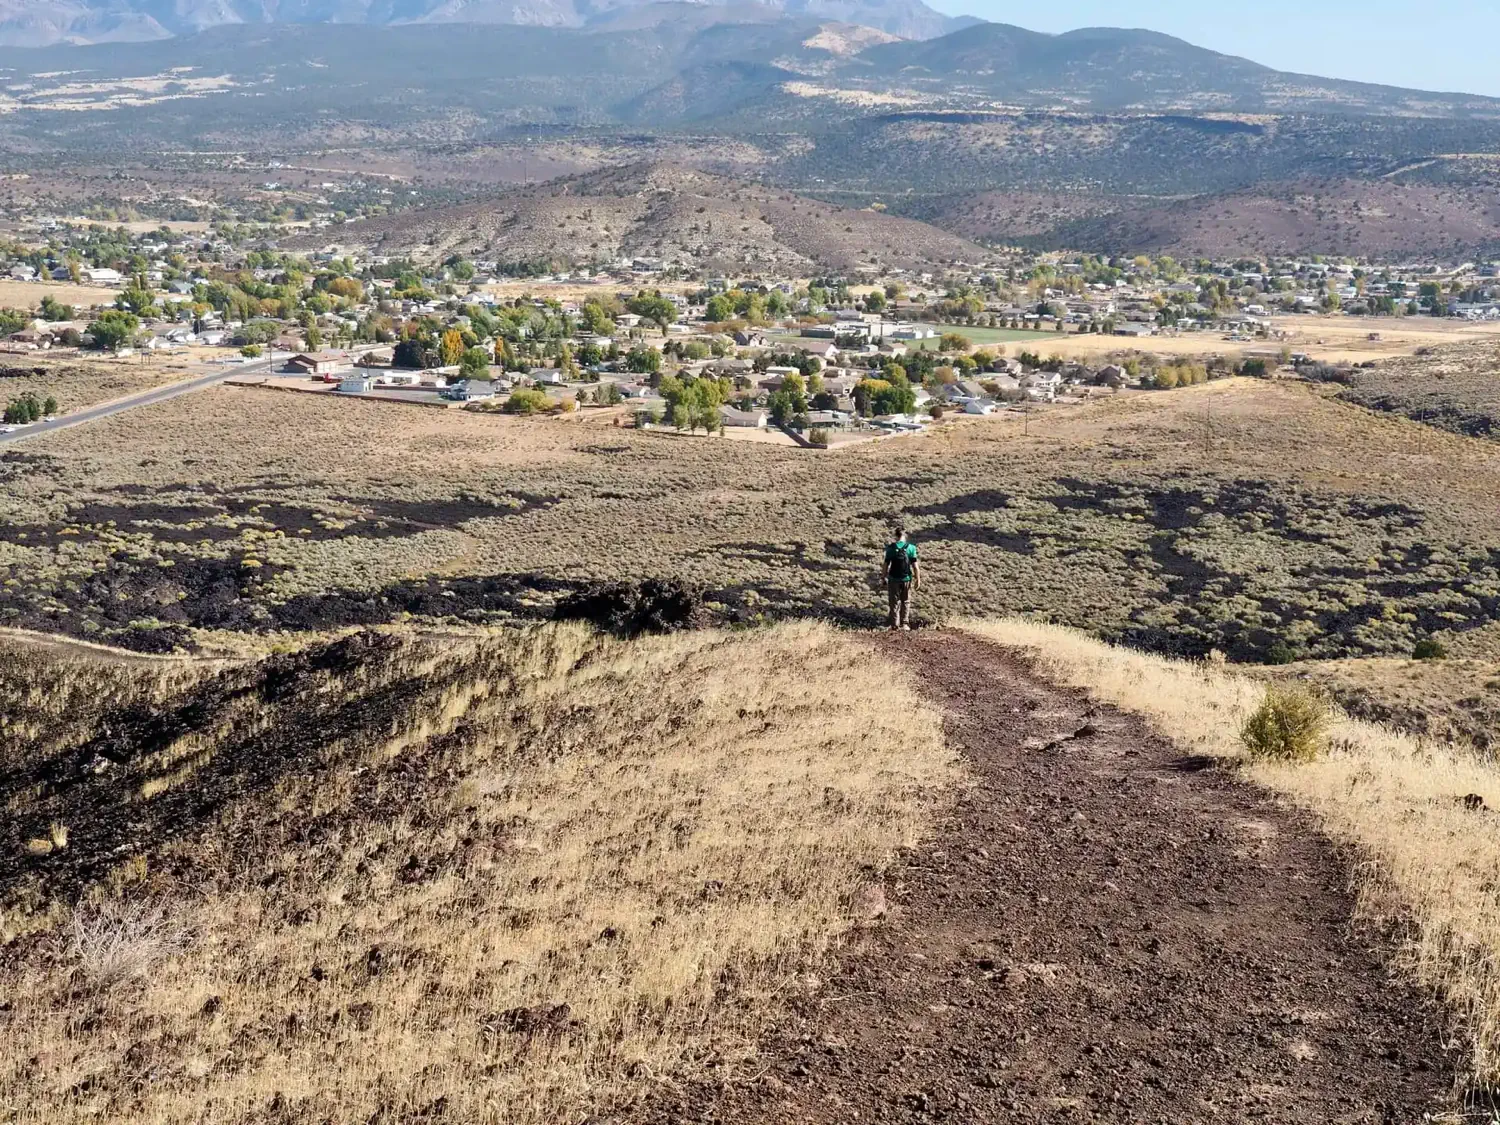 Keith is walking along the rim of the cinder cone as we prepare to descend into it